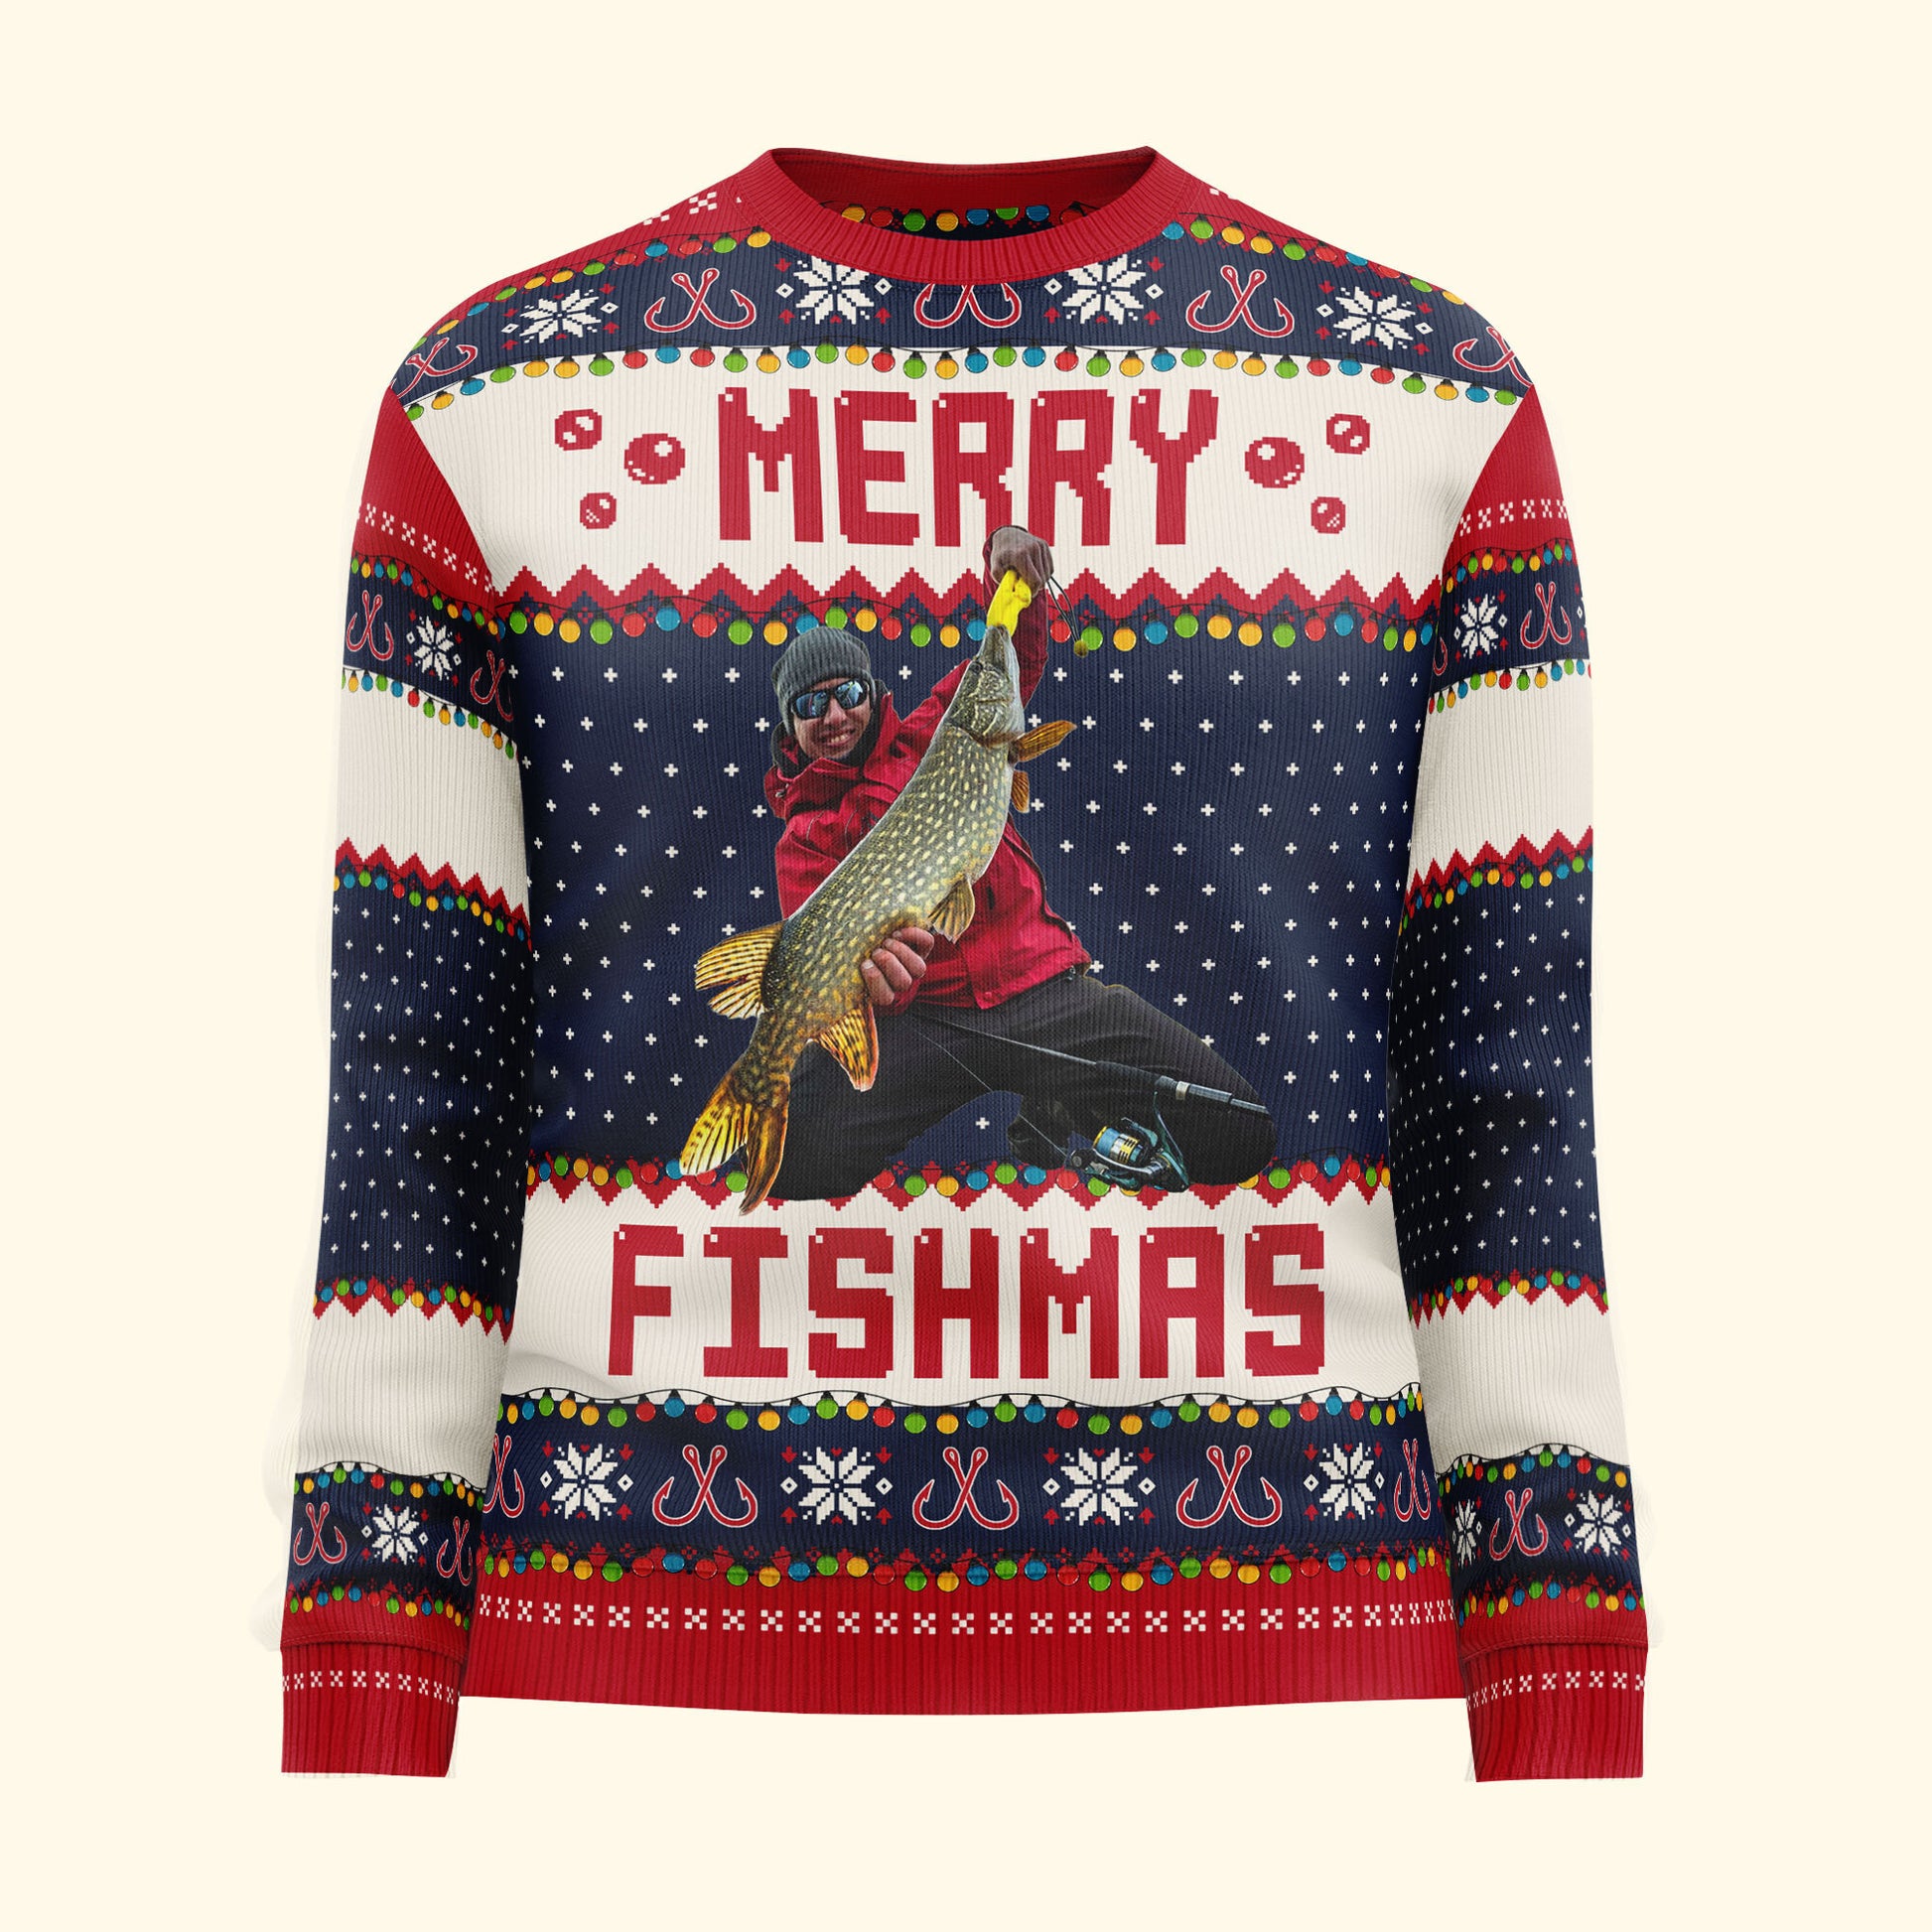 Merry Fishmas For Fishing Dad, Grandpa - Personalized Ugly Sweater